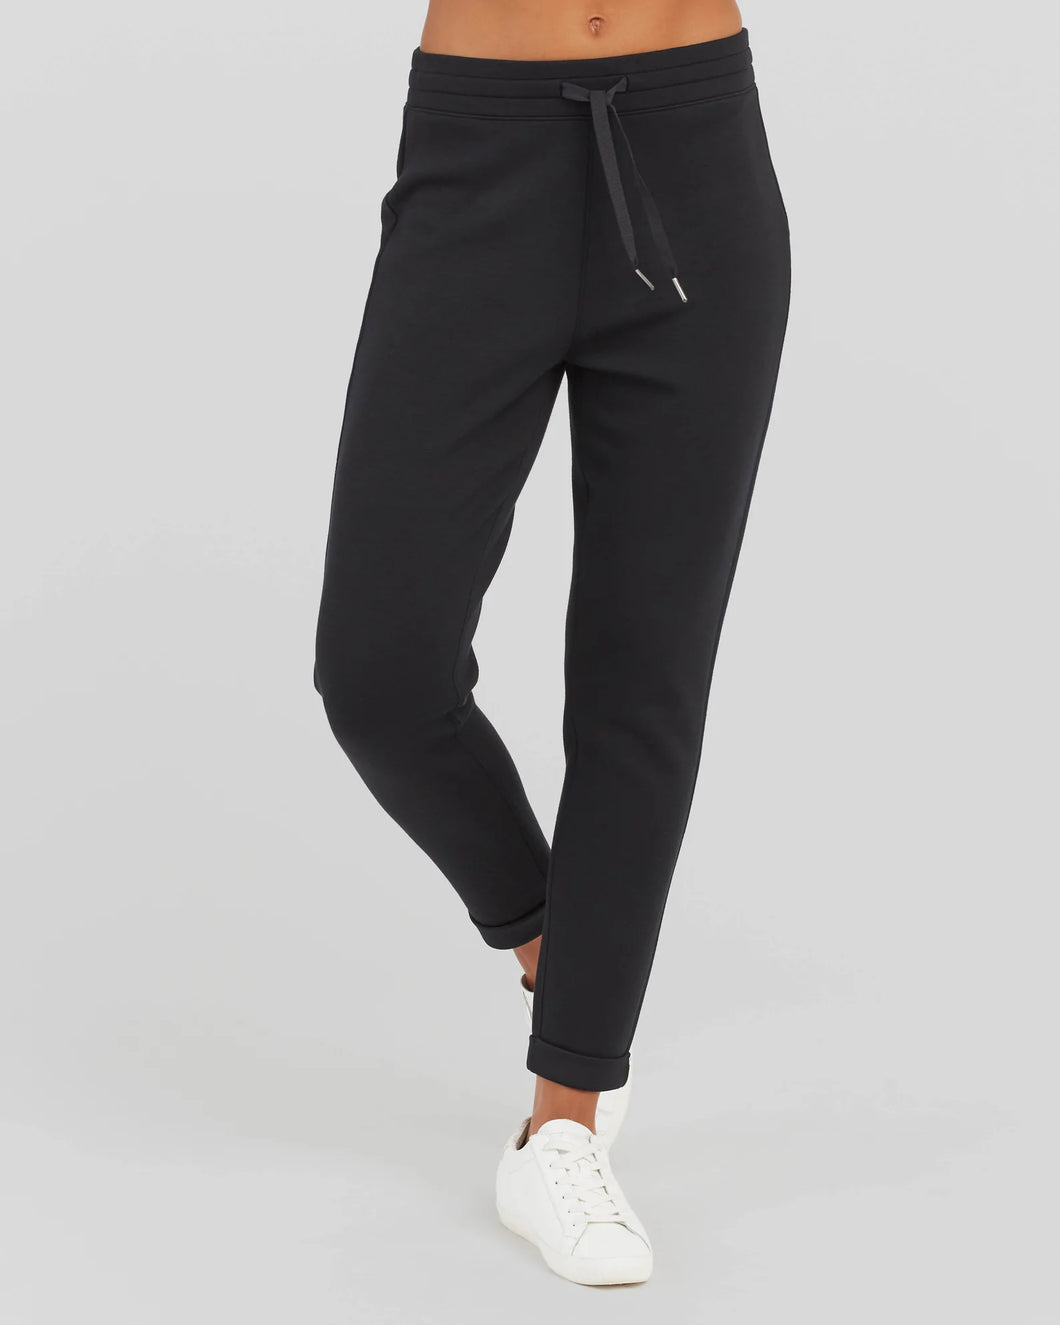 Spanx: AirEssentials Black Tapered Pant